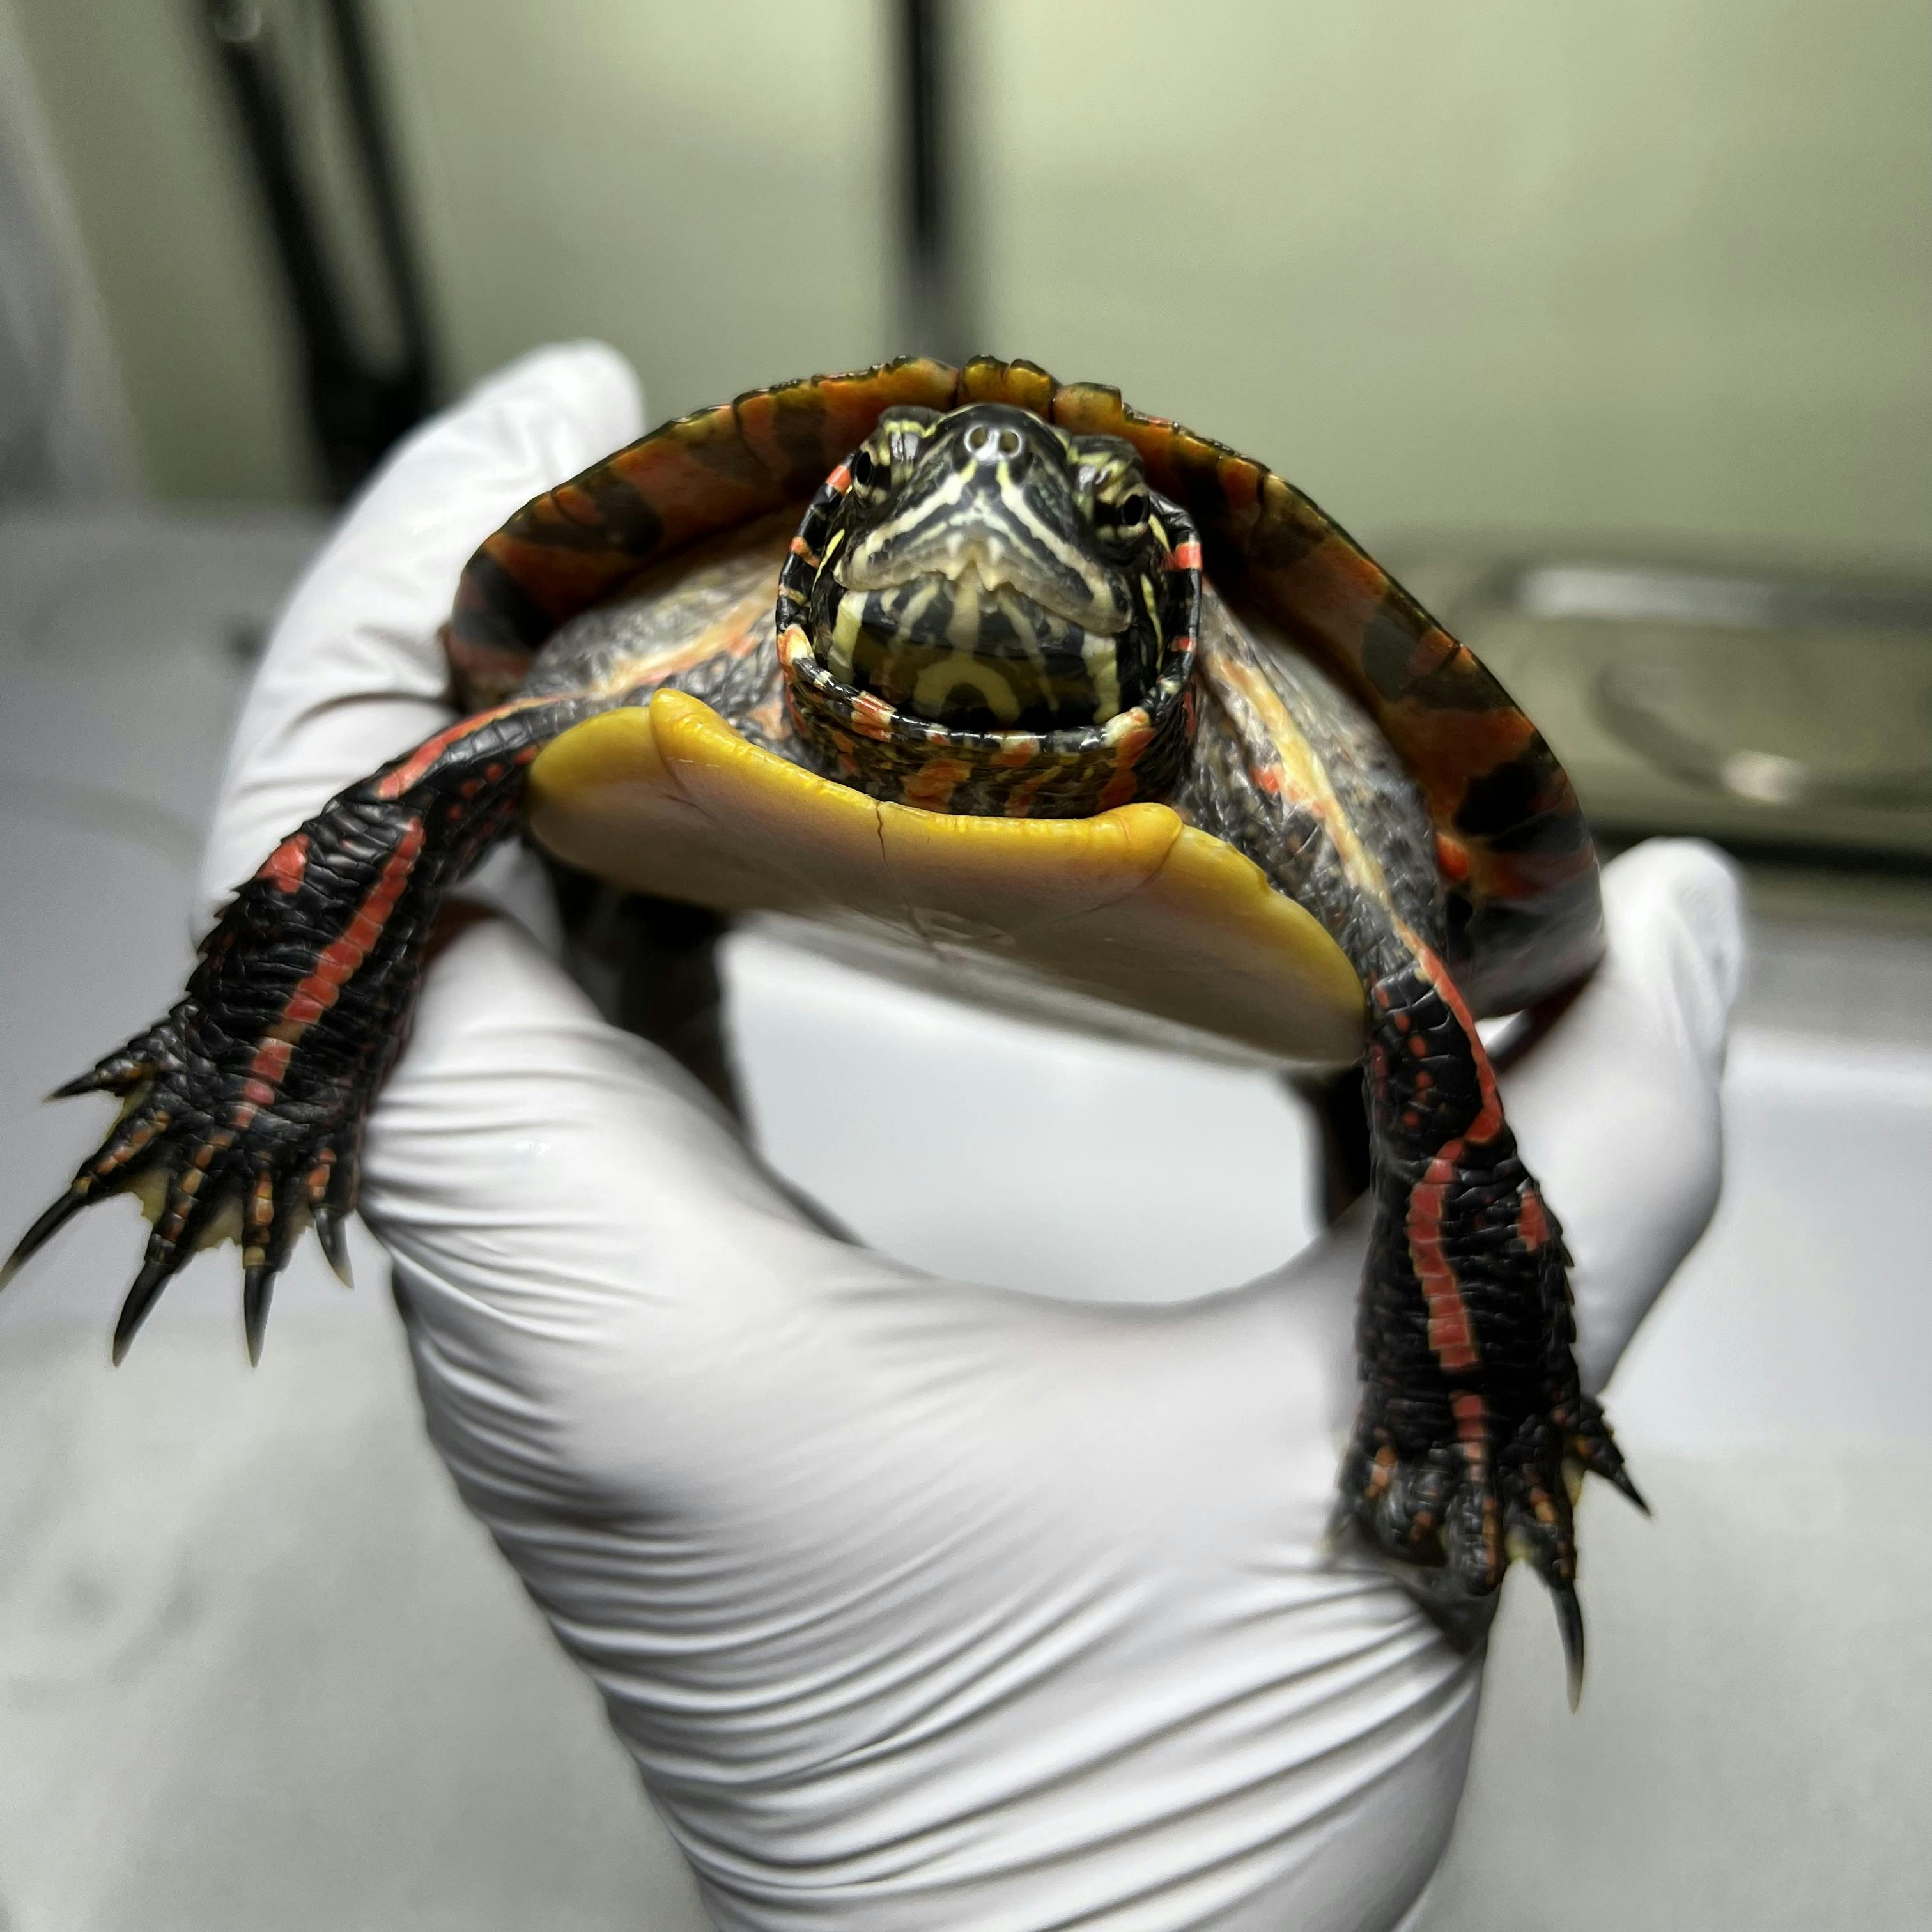 Fang, a male painted turtle